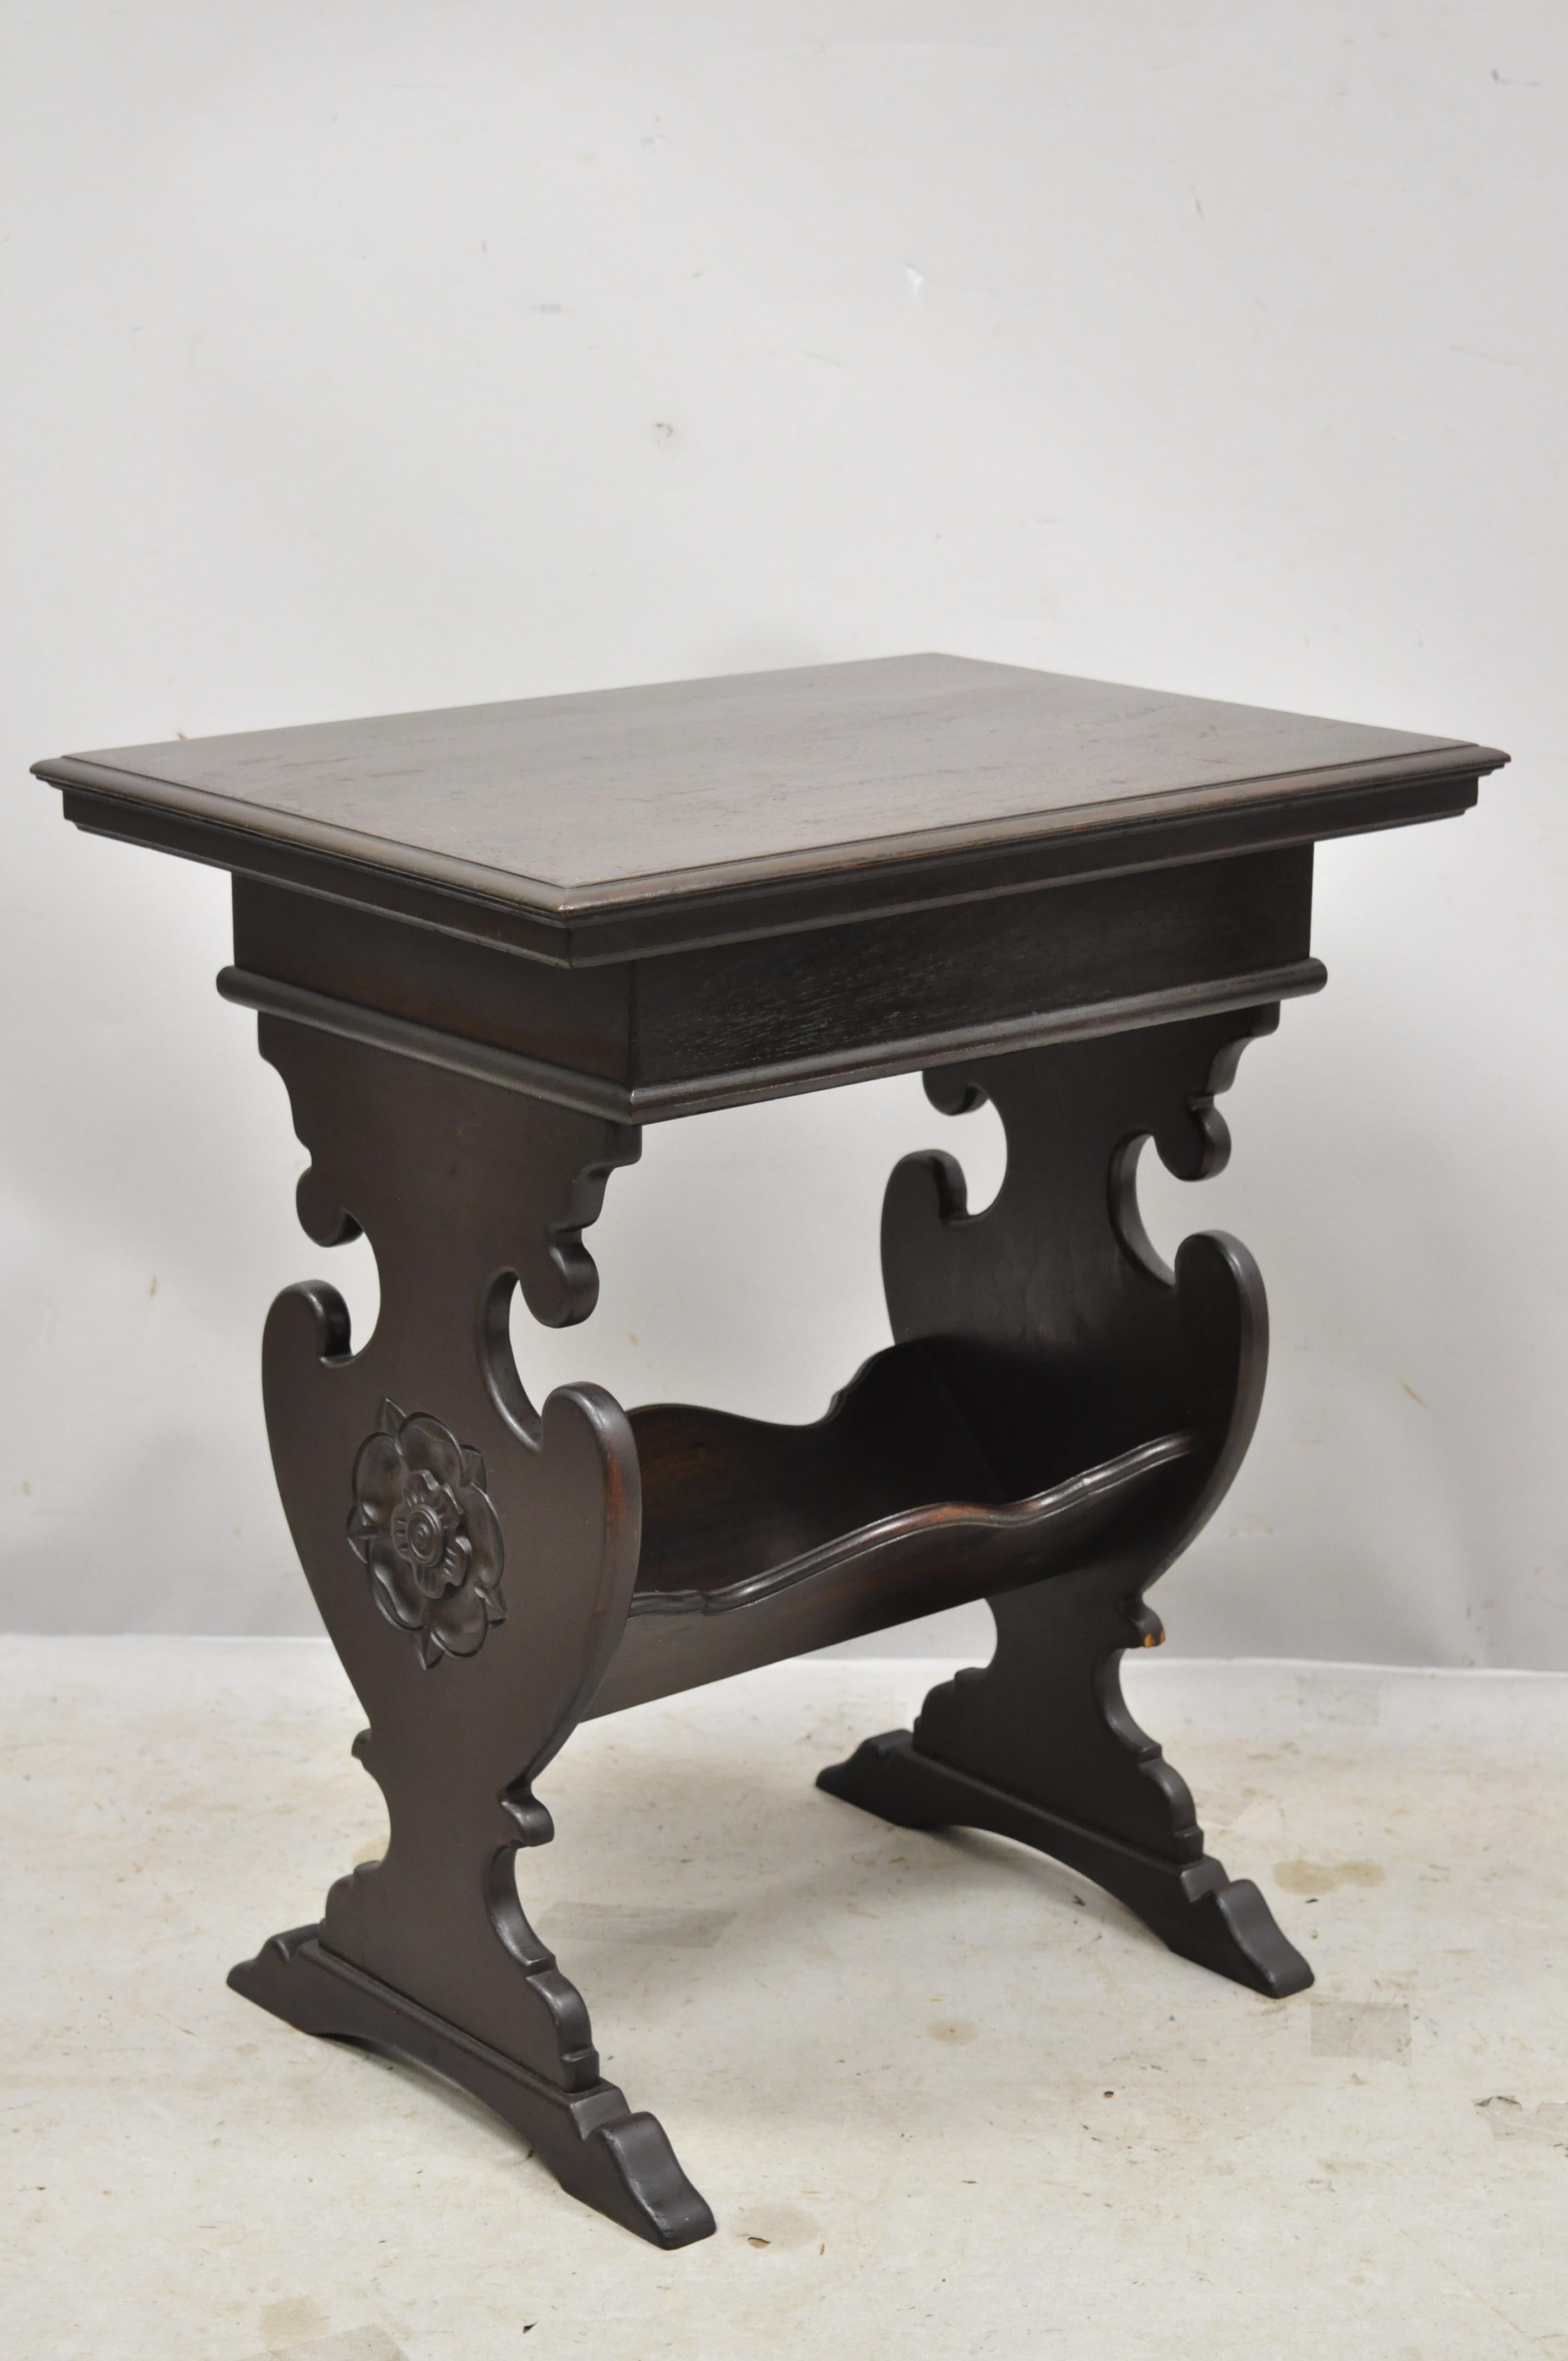 Antique Jacobean trestle style flip storage top work stand side end table. Item features flip storage top, lower storage area, solid wood construction, beautiful wood grain, nicely carved details, very nice antique item, great style and form, circa